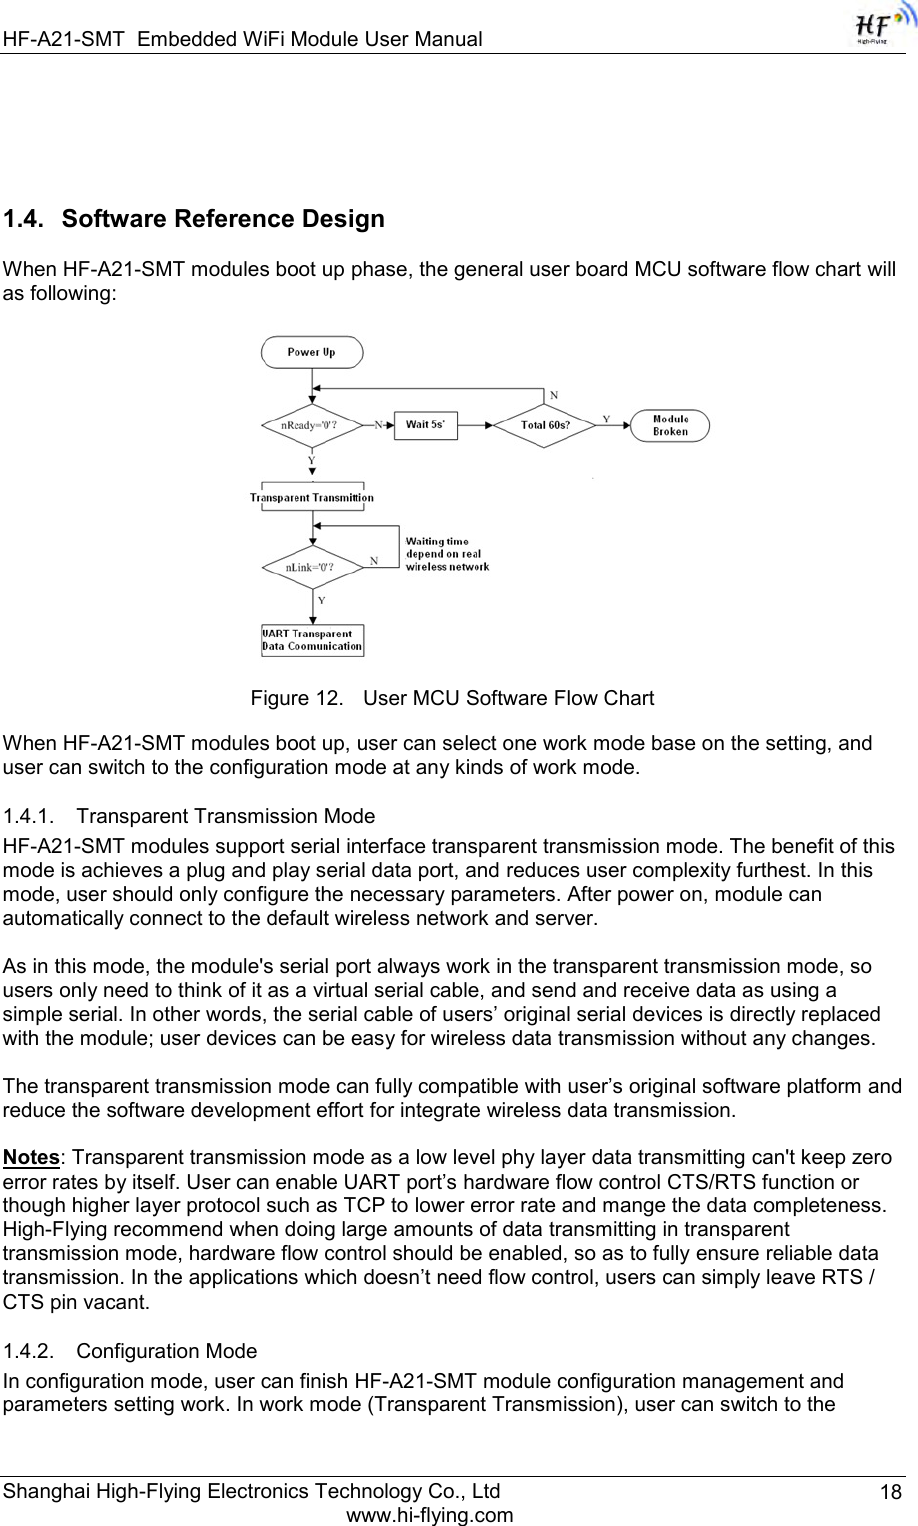 HF-A21-SMT Embedded WiFi Module User Manual Shanghai High-Flying Electronics Technology Co., Ltd www.hi-flying.com 18   1.4. Software Reference Design  When HF-A21-SMT modules boot up phase, the general user board MCU software flow chart will as following:    Figure 12. User MCU Software Flow Chart  When HF-A21-SMT modules boot up, user can select one work mode base on the setting, and user can switch to the configuration mode at any kinds of work mode.  1.4.1. Transparent Transmission Mode HF-A21-SMT modules support serial interface transparent transmission mode. The benefit of this mode is achieves a plug and play serial data port, and reduces user complexity furthest. In this mode, user should only configure the necessary parameters. After power on, module can automatically connect to the default wireless network and server.   As in this mode, the module&apos;s serial port always work in the transparent transmission mode, so users only need to think of it as a virtual serial cable, and send and receive data as using a simple serial. In other words, the serial cable of users‟ original serial devices is directly replaced with the module; user devices can be easy for wireless data transmission without any changes.  The transparent transmission mode can fully compatible with user‟s original software platform and reduce the software development effort for integrate wireless data transmission.  Notes: Transparent transmission mode as a low level phy layer data transmitting can&apos;t keep zero error rates by itself. User can enable UART port‟s hardware flow control CTS/RTS function or though higher layer protocol such as TCP to lower error rate and mange the data completeness. High-Flying recommend when doing large amounts of data transmitting in transparent transmission mode, hardware flow control should be enabled, so as to fully ensure reliable data transmission. In the applications which doesn‟t need flow control, users can simply leave RTS / CTS pin vacant. 1.4.2. Configuration Mode In configuration mode, user can finish HF-A21-SMT module configuration management and parameters setting work. In work mode (Transparent Transmission), user can switch to the 